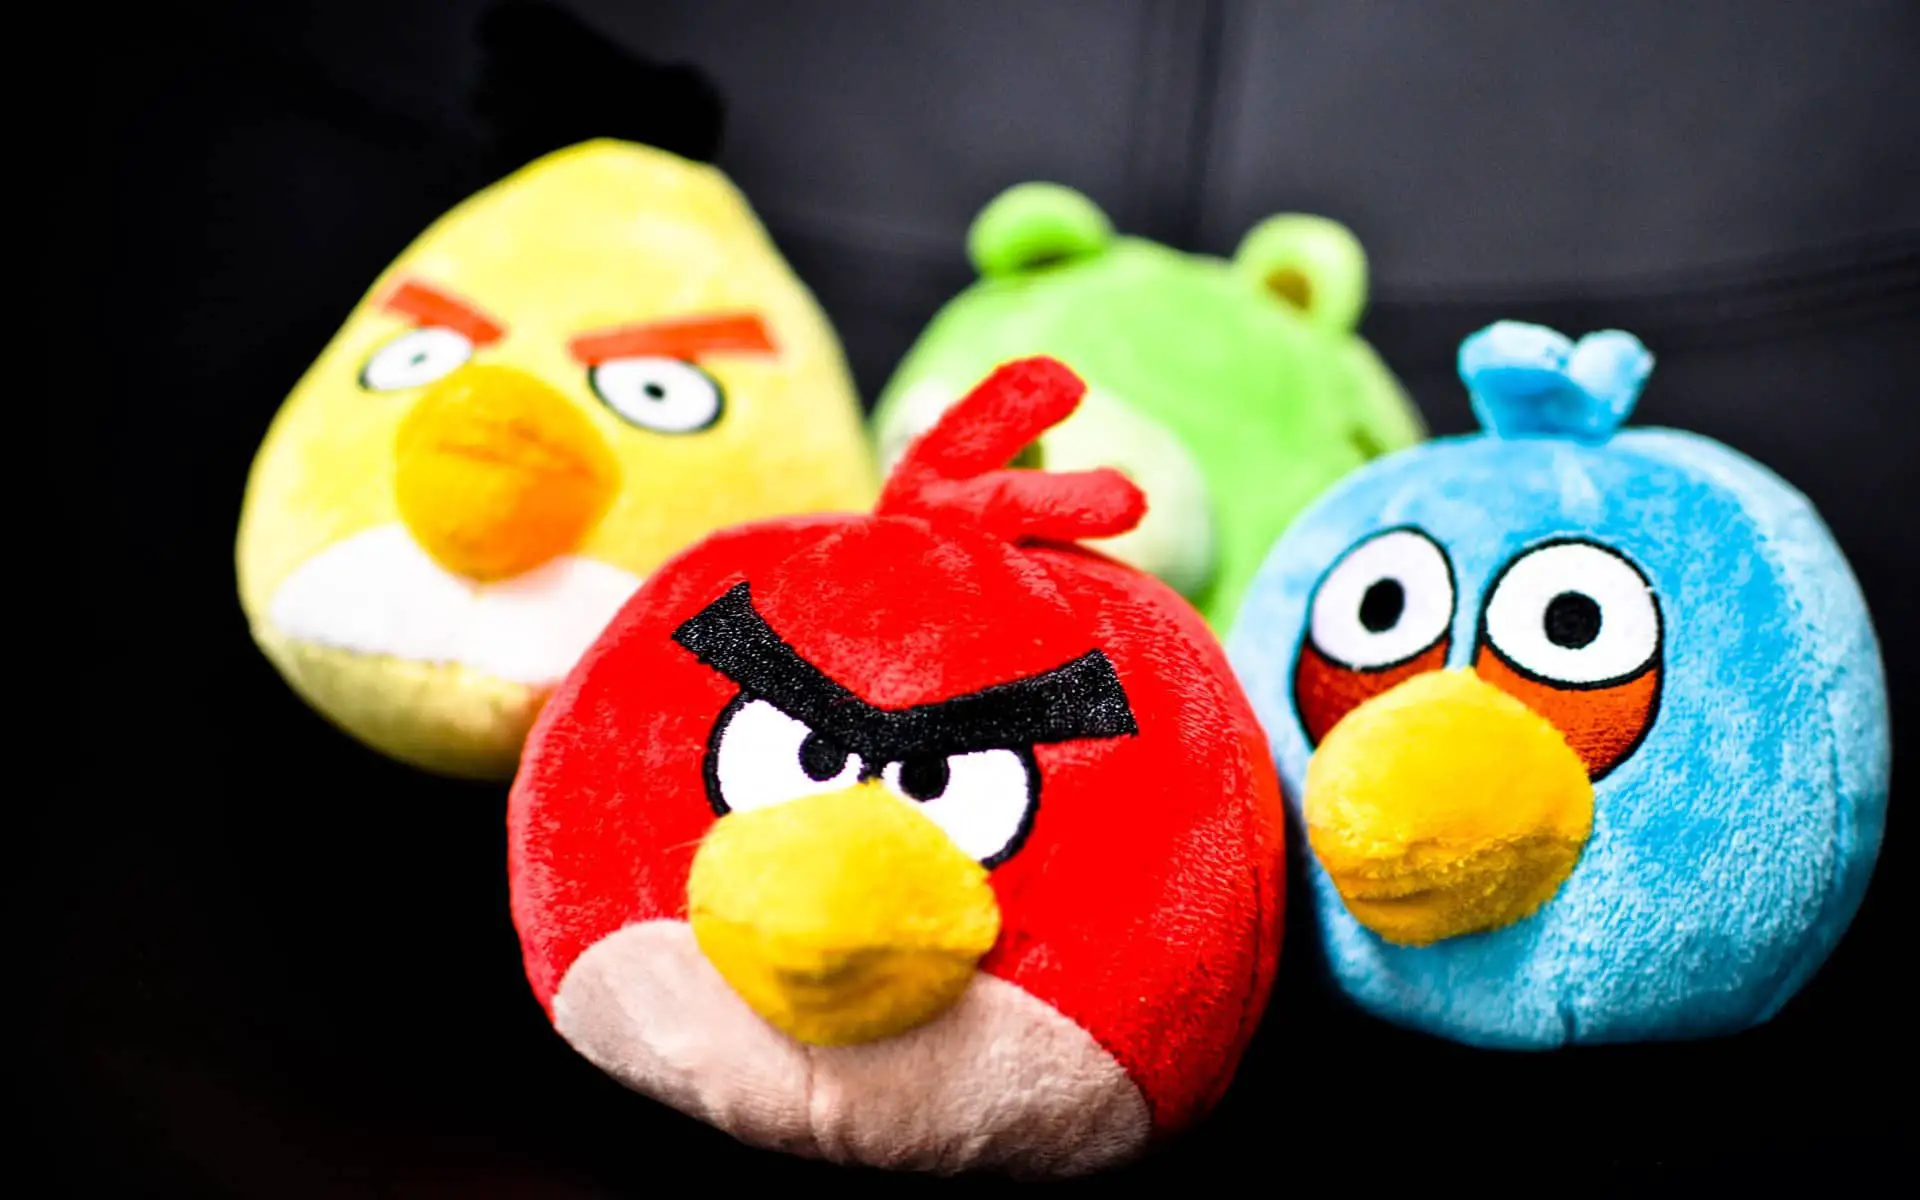 Angry Birds toys